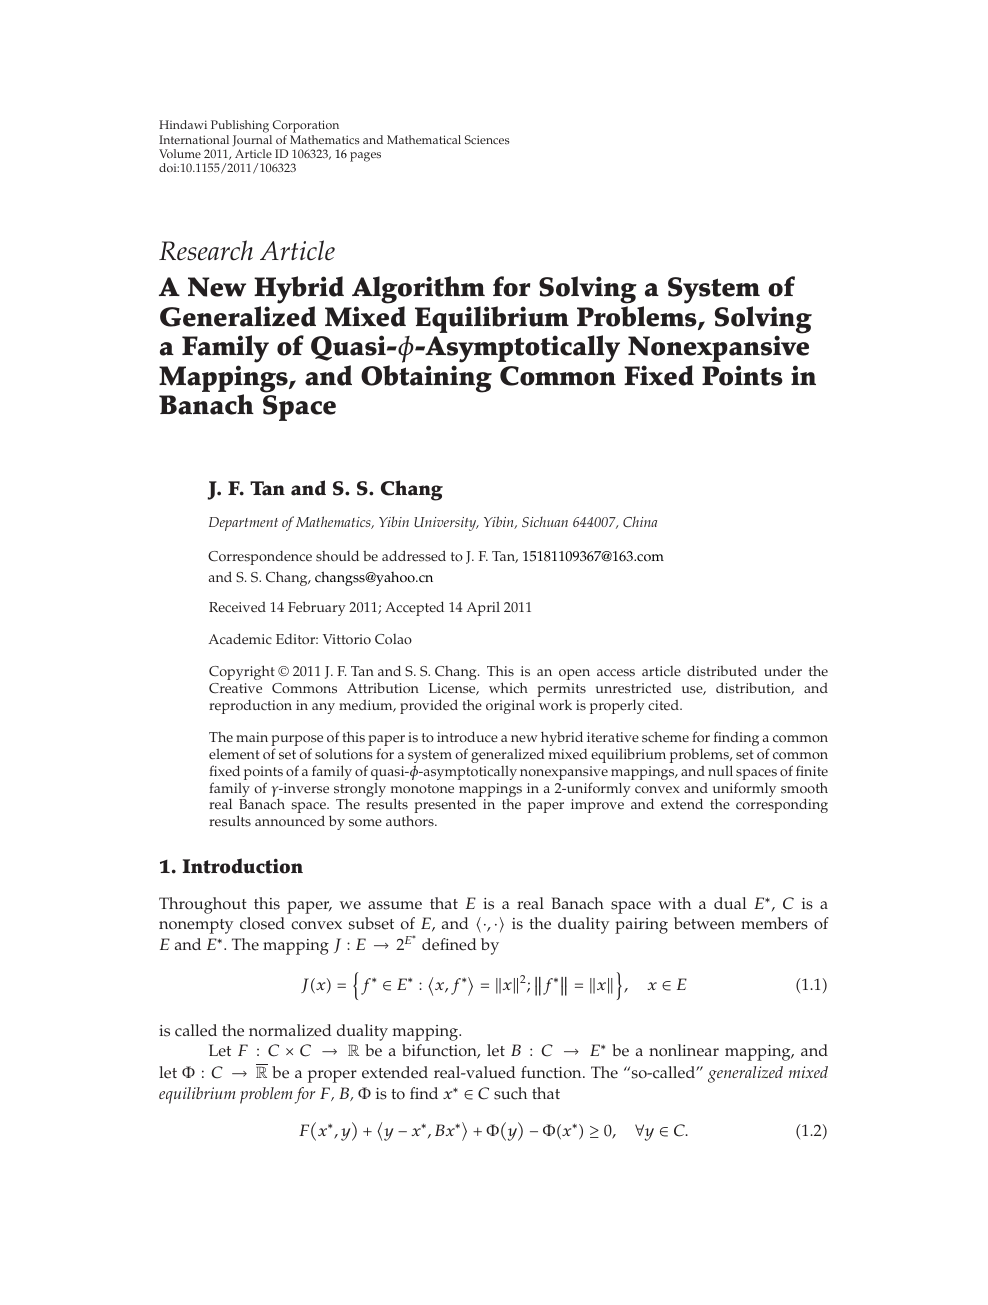 A New Hybrid Algorithm For Solving A System Of Generalized Mixed Equilibrium Problems Solving A Family Of Quasi 𝜙 Asymptotically Nonexpansive Mappings And Obtaining Common Fixed Points In Banach Space Topic Of Research